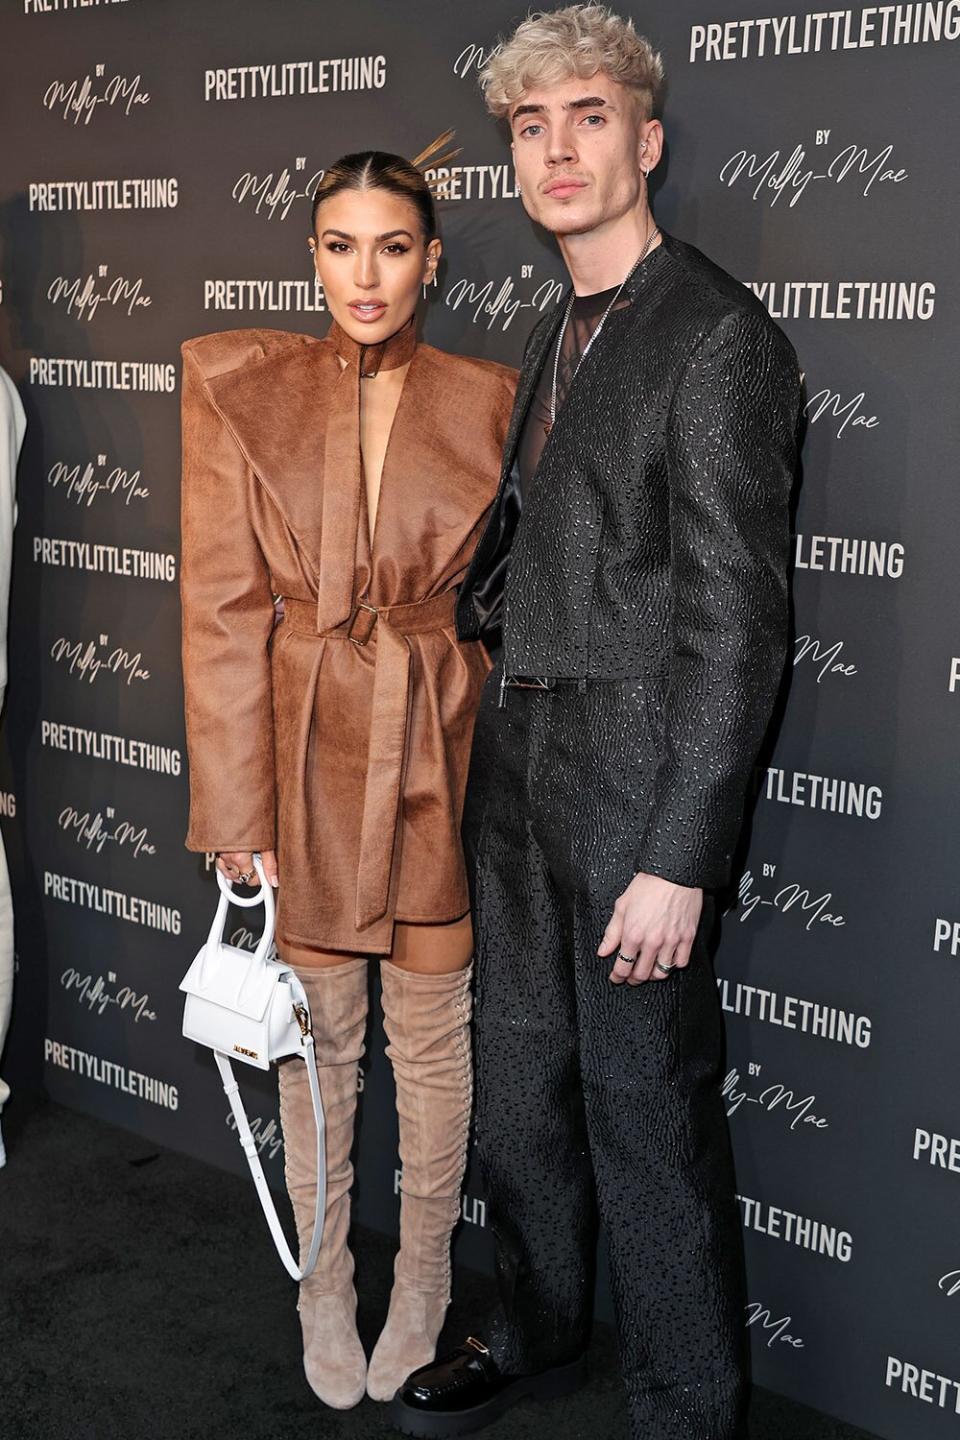 LONDON, ENGLAND - FEBRUARY 16: Emily Miller and Cam Holmes attend the PrettyLittleThing X Molly-Mae show at The Londoner Hotel on February 16, 2022 in London, England. (Photo by Mike Marsland/WireImage)